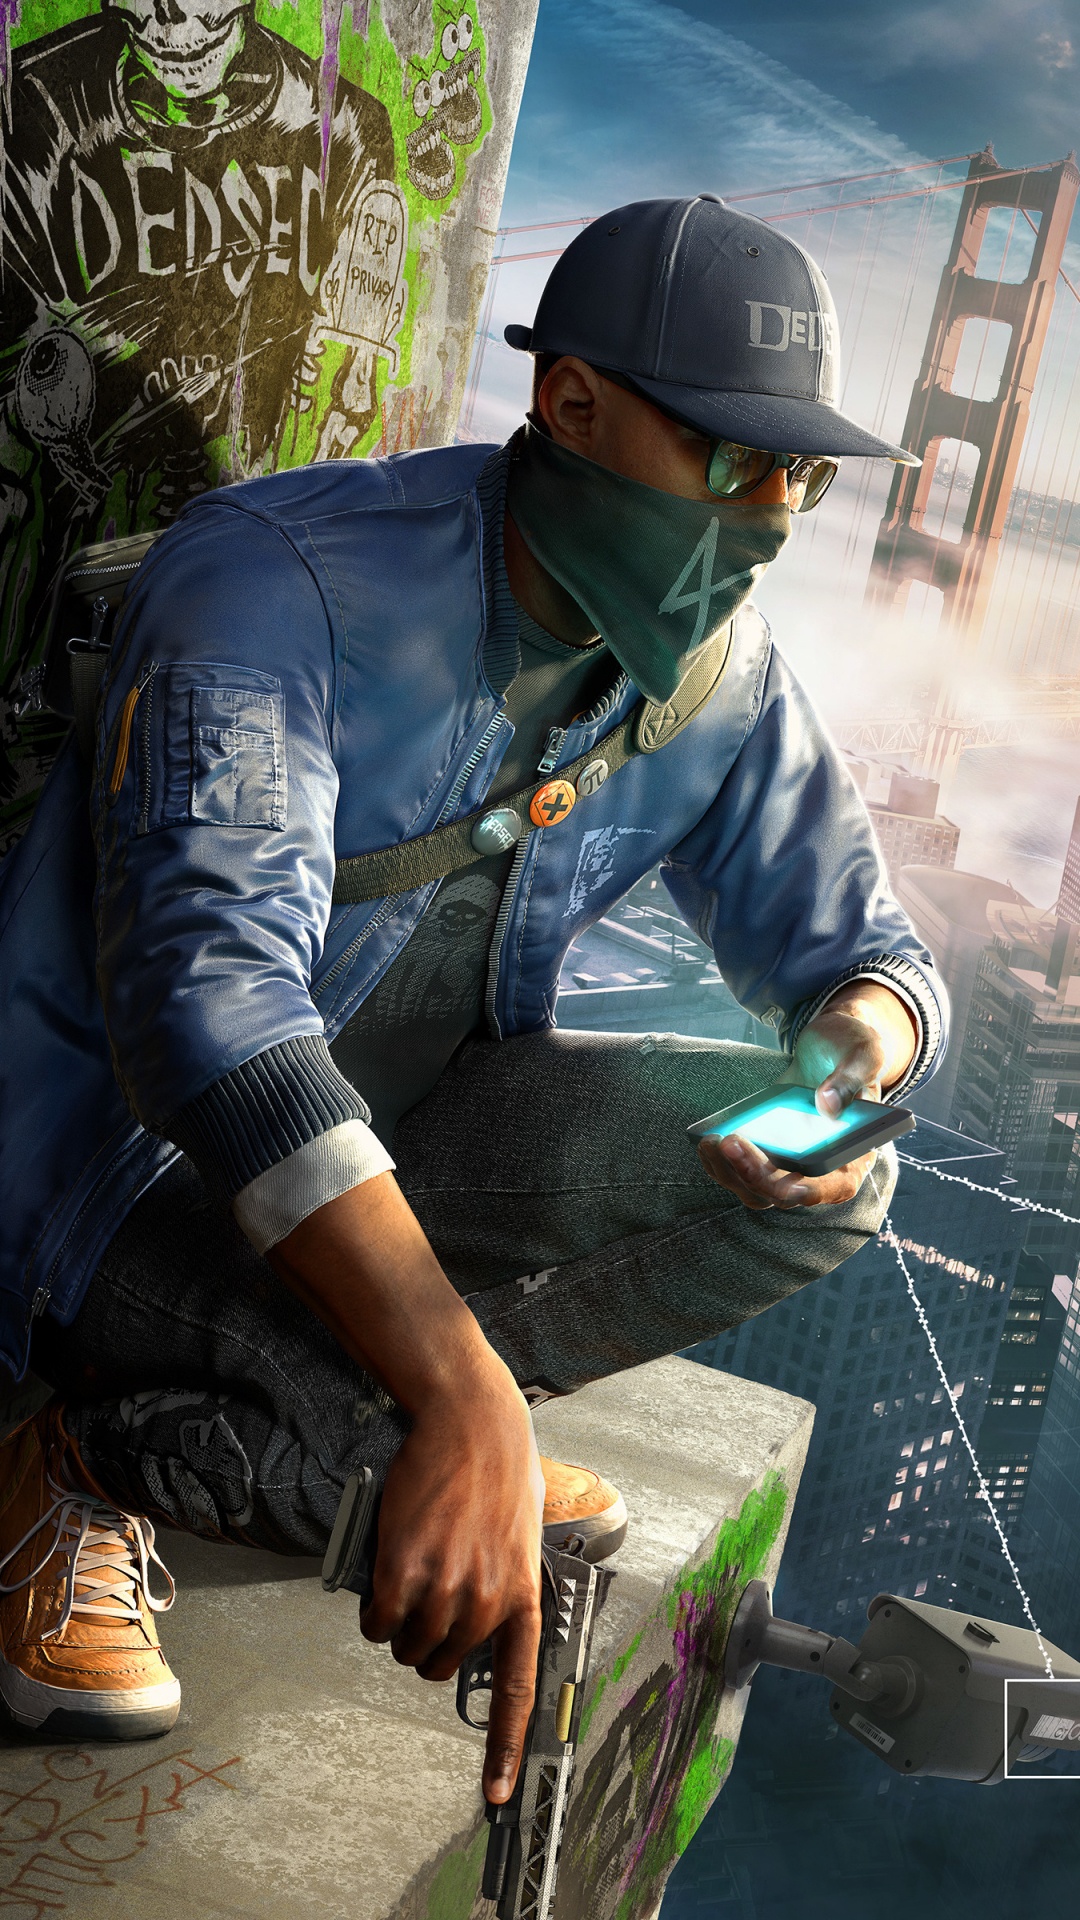 Watch Dogs 2, Watch Dogs, Ubisoft, Playstation 4, Jeu Pc. Wallpaper in 1080x1920 Resolution